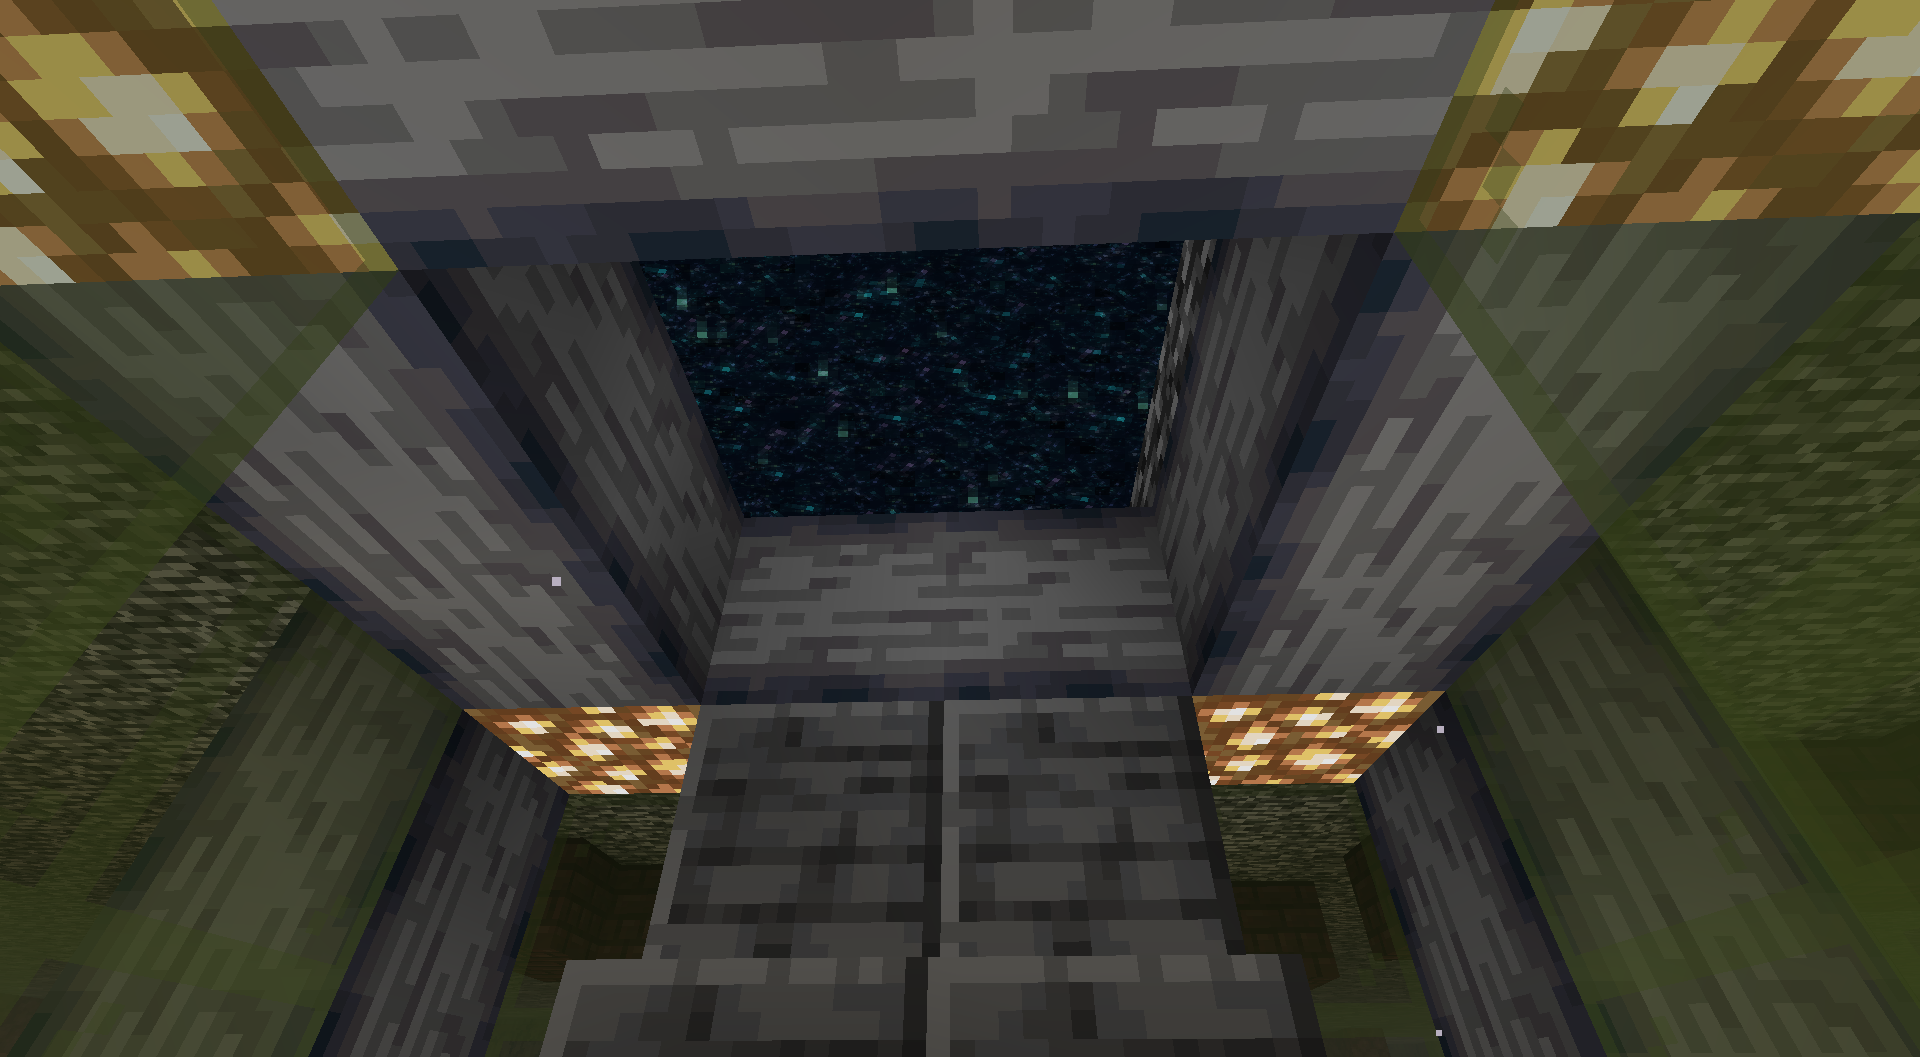 Example of a nether portal on the nether roof.